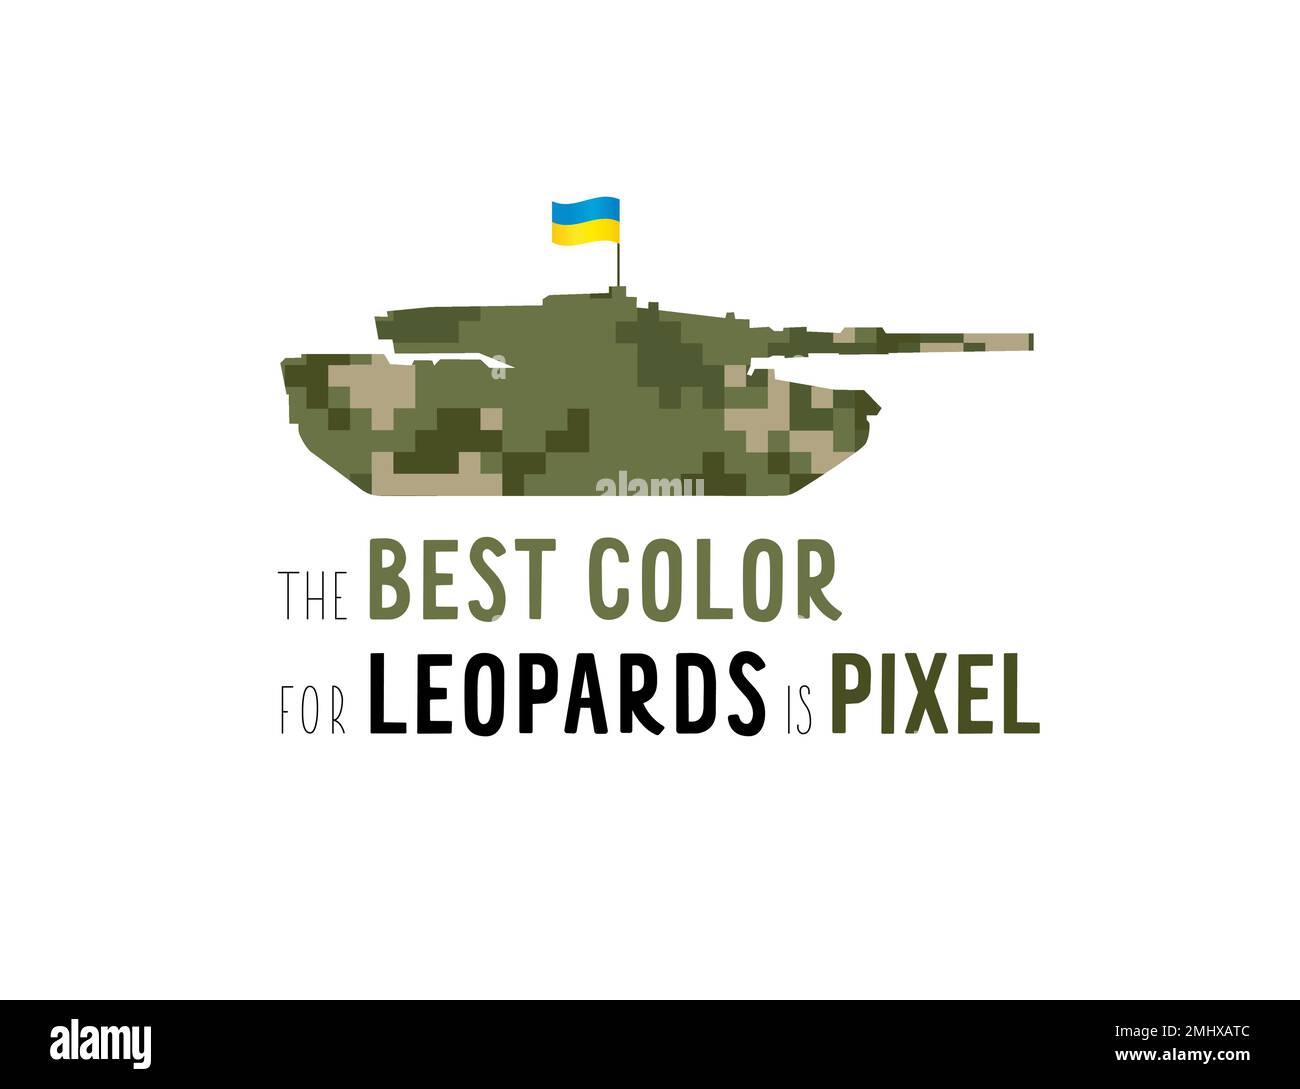 The best color for leopards is pixel.Tank leopard in Ukrainian camouflage colors. Keep calm and give tanks to Ukraine, creative vector poster Stock Vector